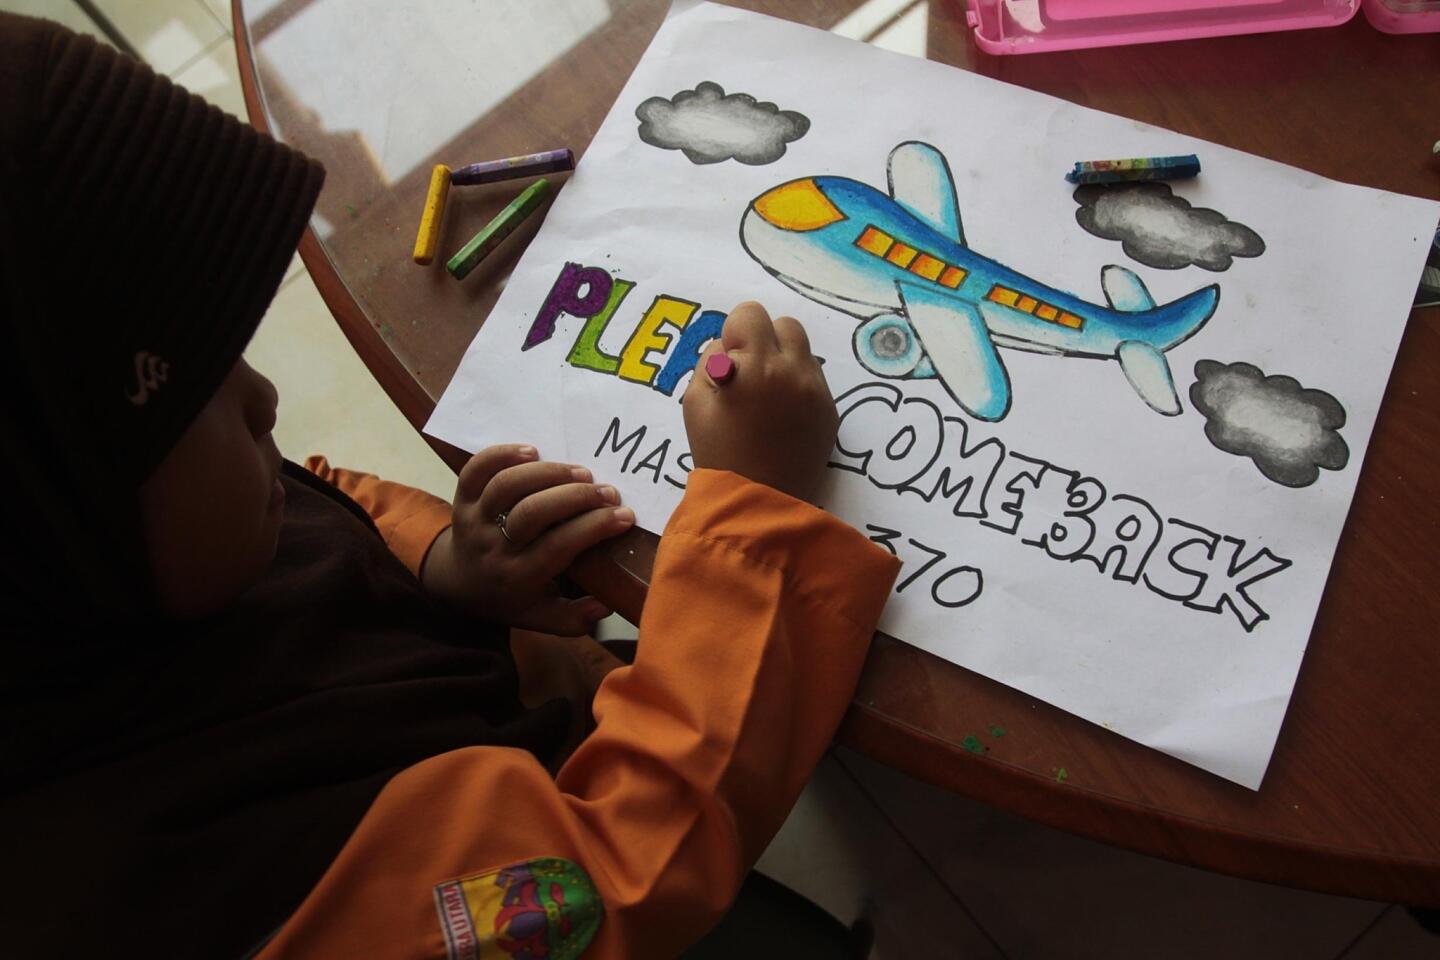 An Indonesian student writes a message expressing prayers and well-wishes for passengers onboard missing Malaysia Airlines (MAS) flight MH370 in Medan, North Sumatra, on March 15, 2014.